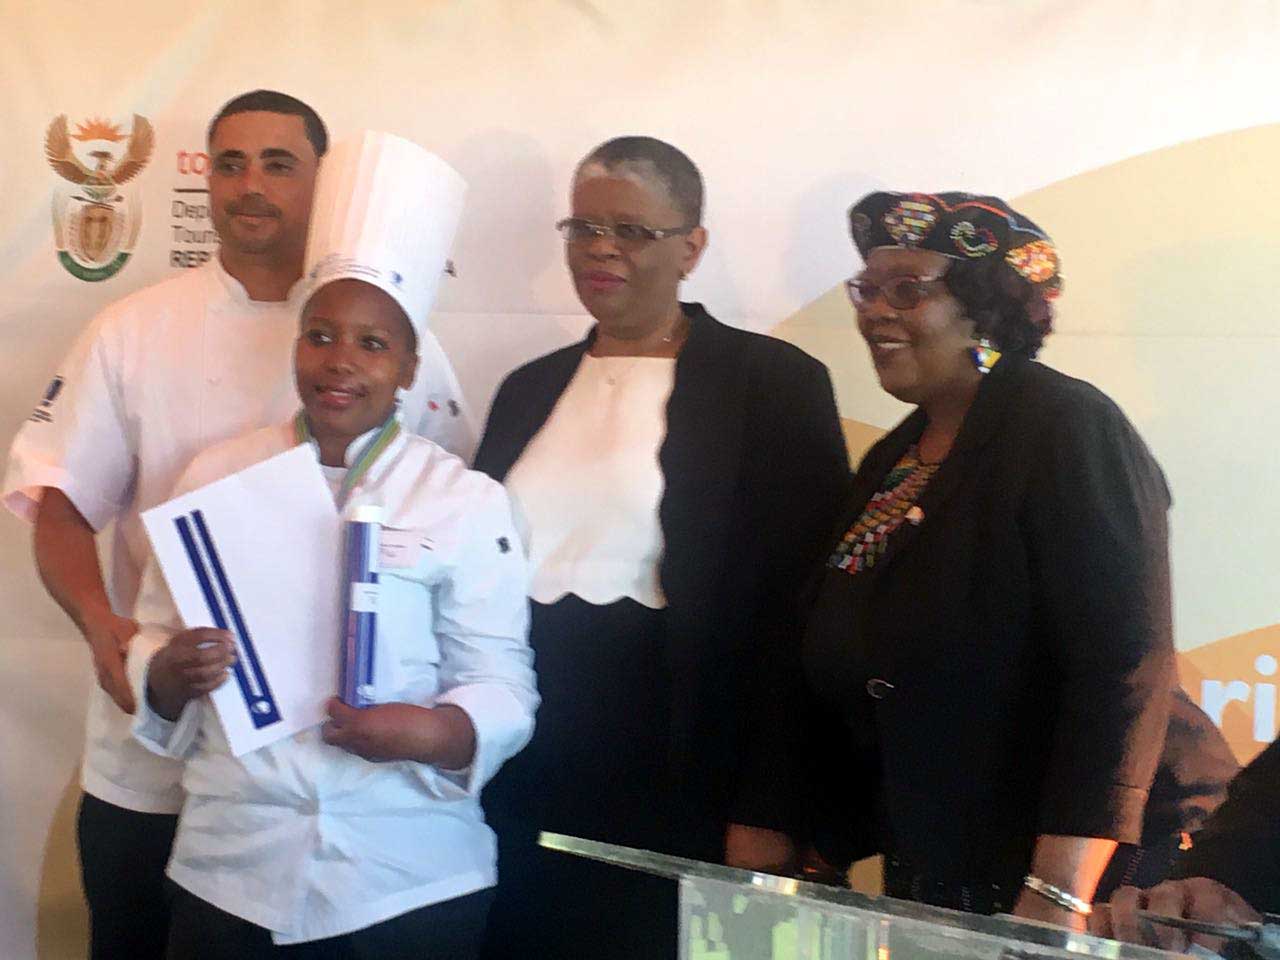 KwaZulu-Natal young chefs graduate from tourism programme with international accreditation 